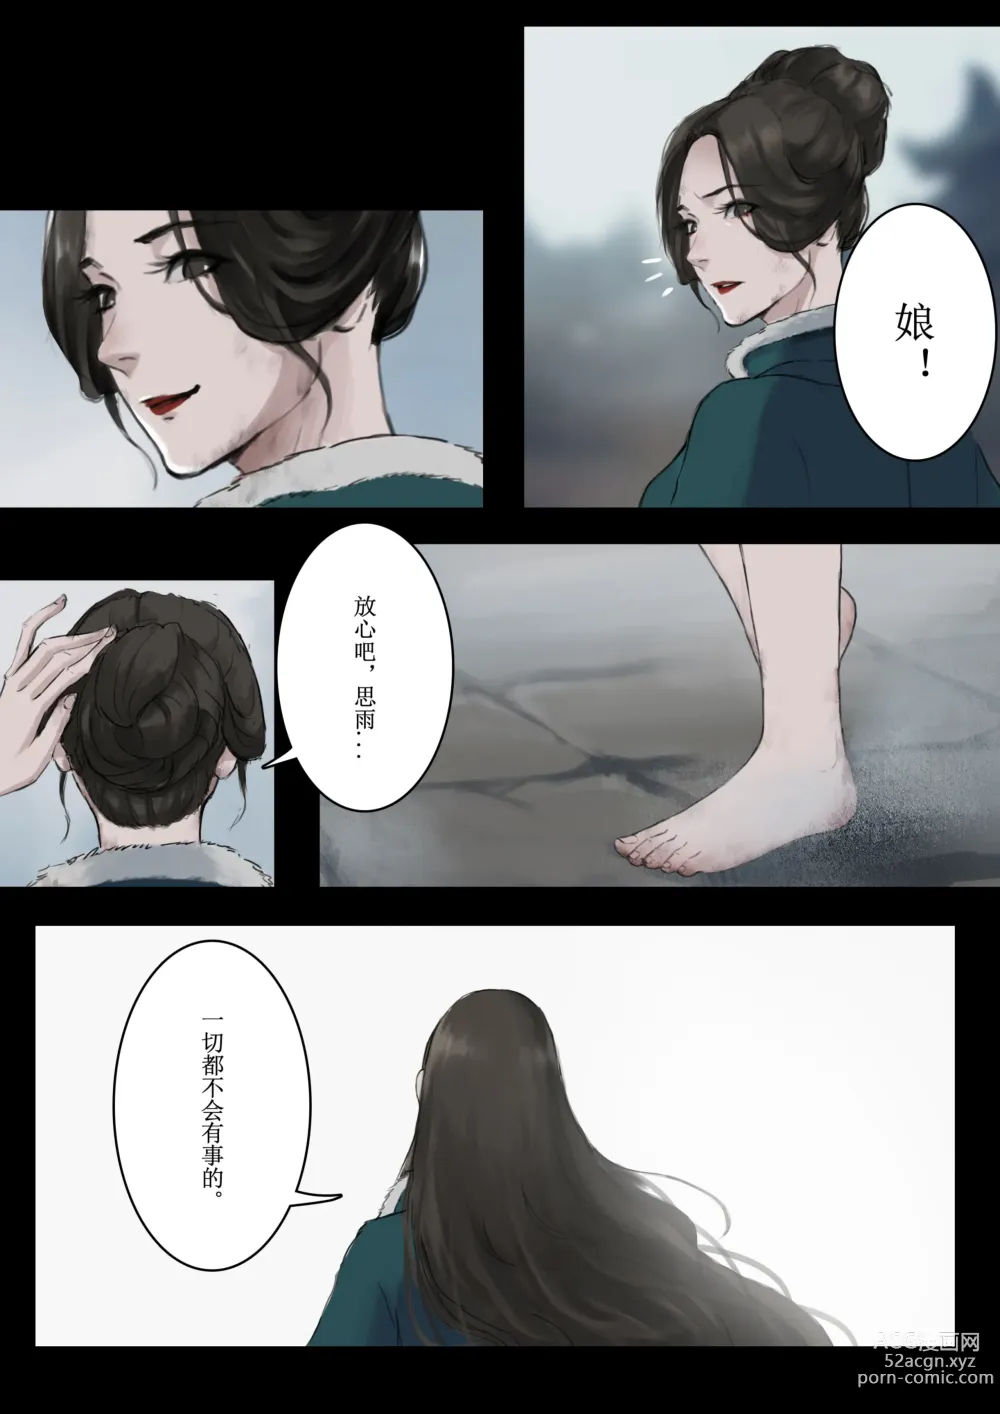 Page 2 of doujinshi 砂中莲